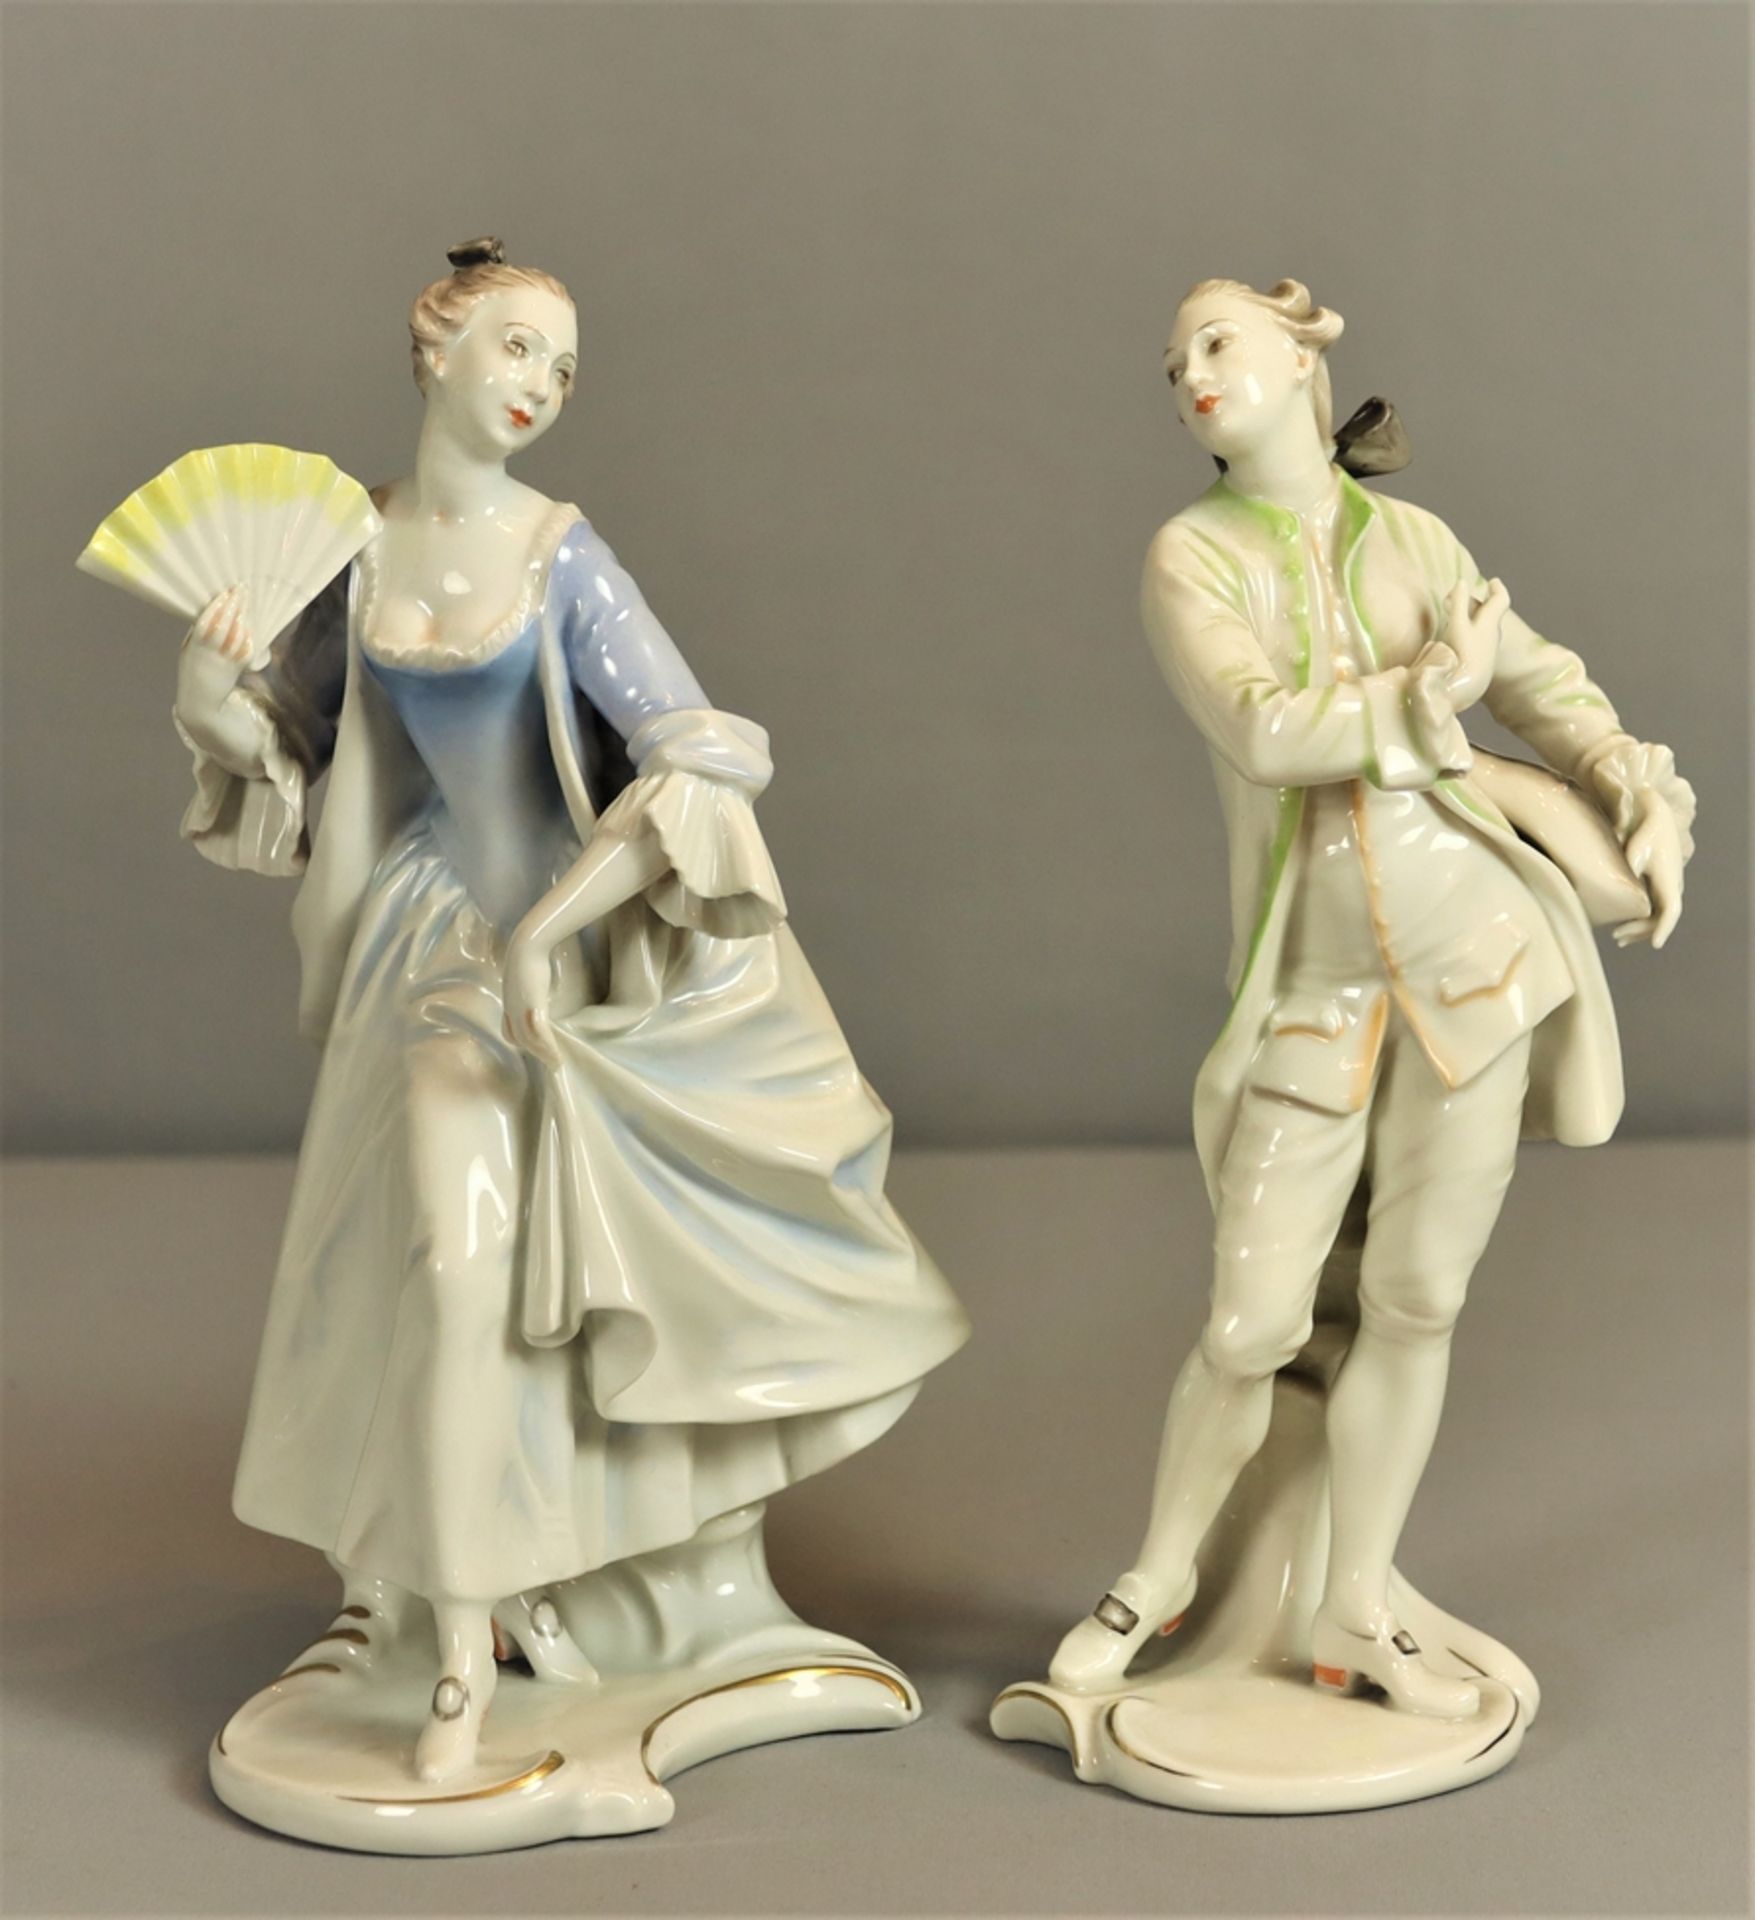 Pair of Rosenthal porcelain figures, gallant rococo couple, 20th century, German - Image 2 of 2